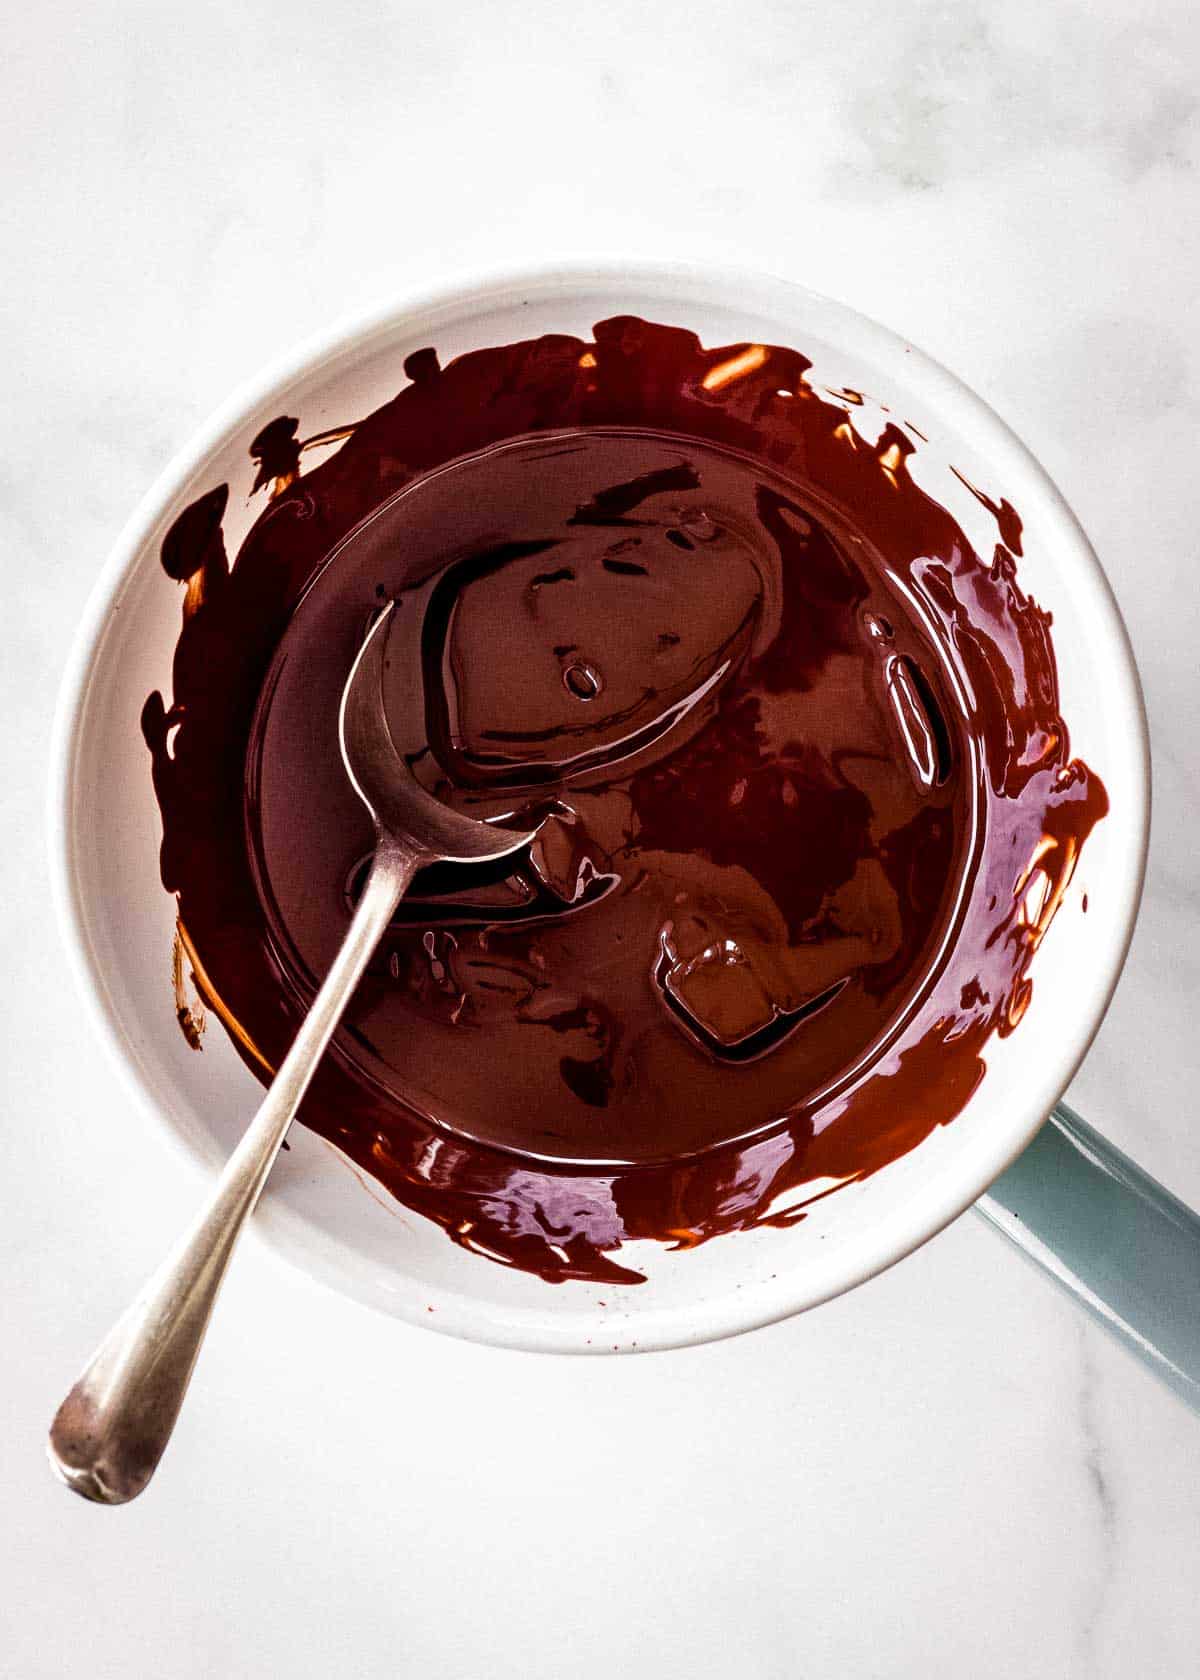 A small bowl over a saucepan is filled with melted dark chocolate.